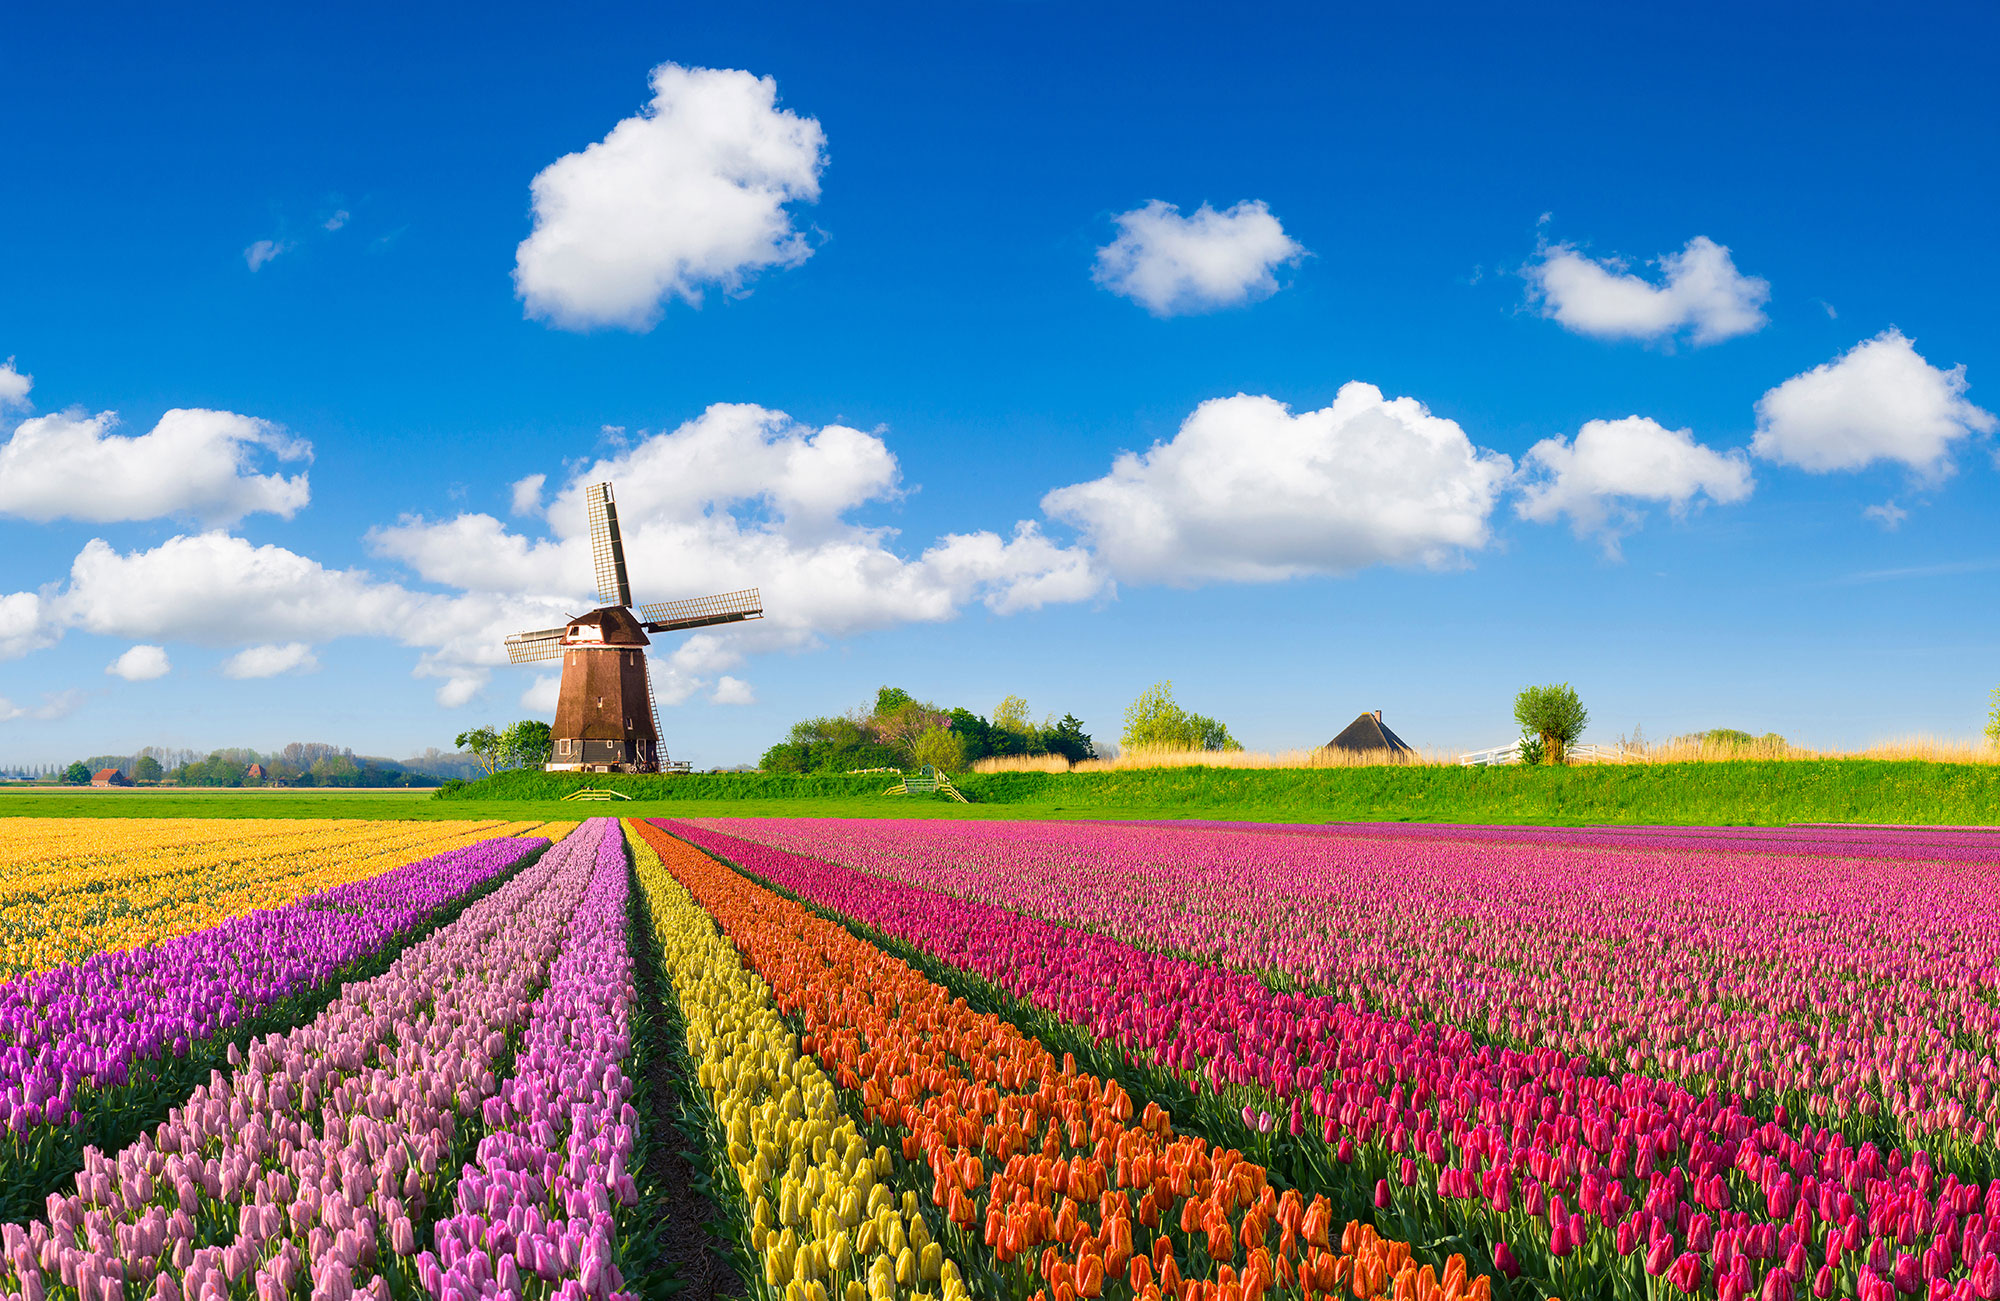 Multi-colored tulip fields in front of a Dutch windmill under a nicely clouded sky.